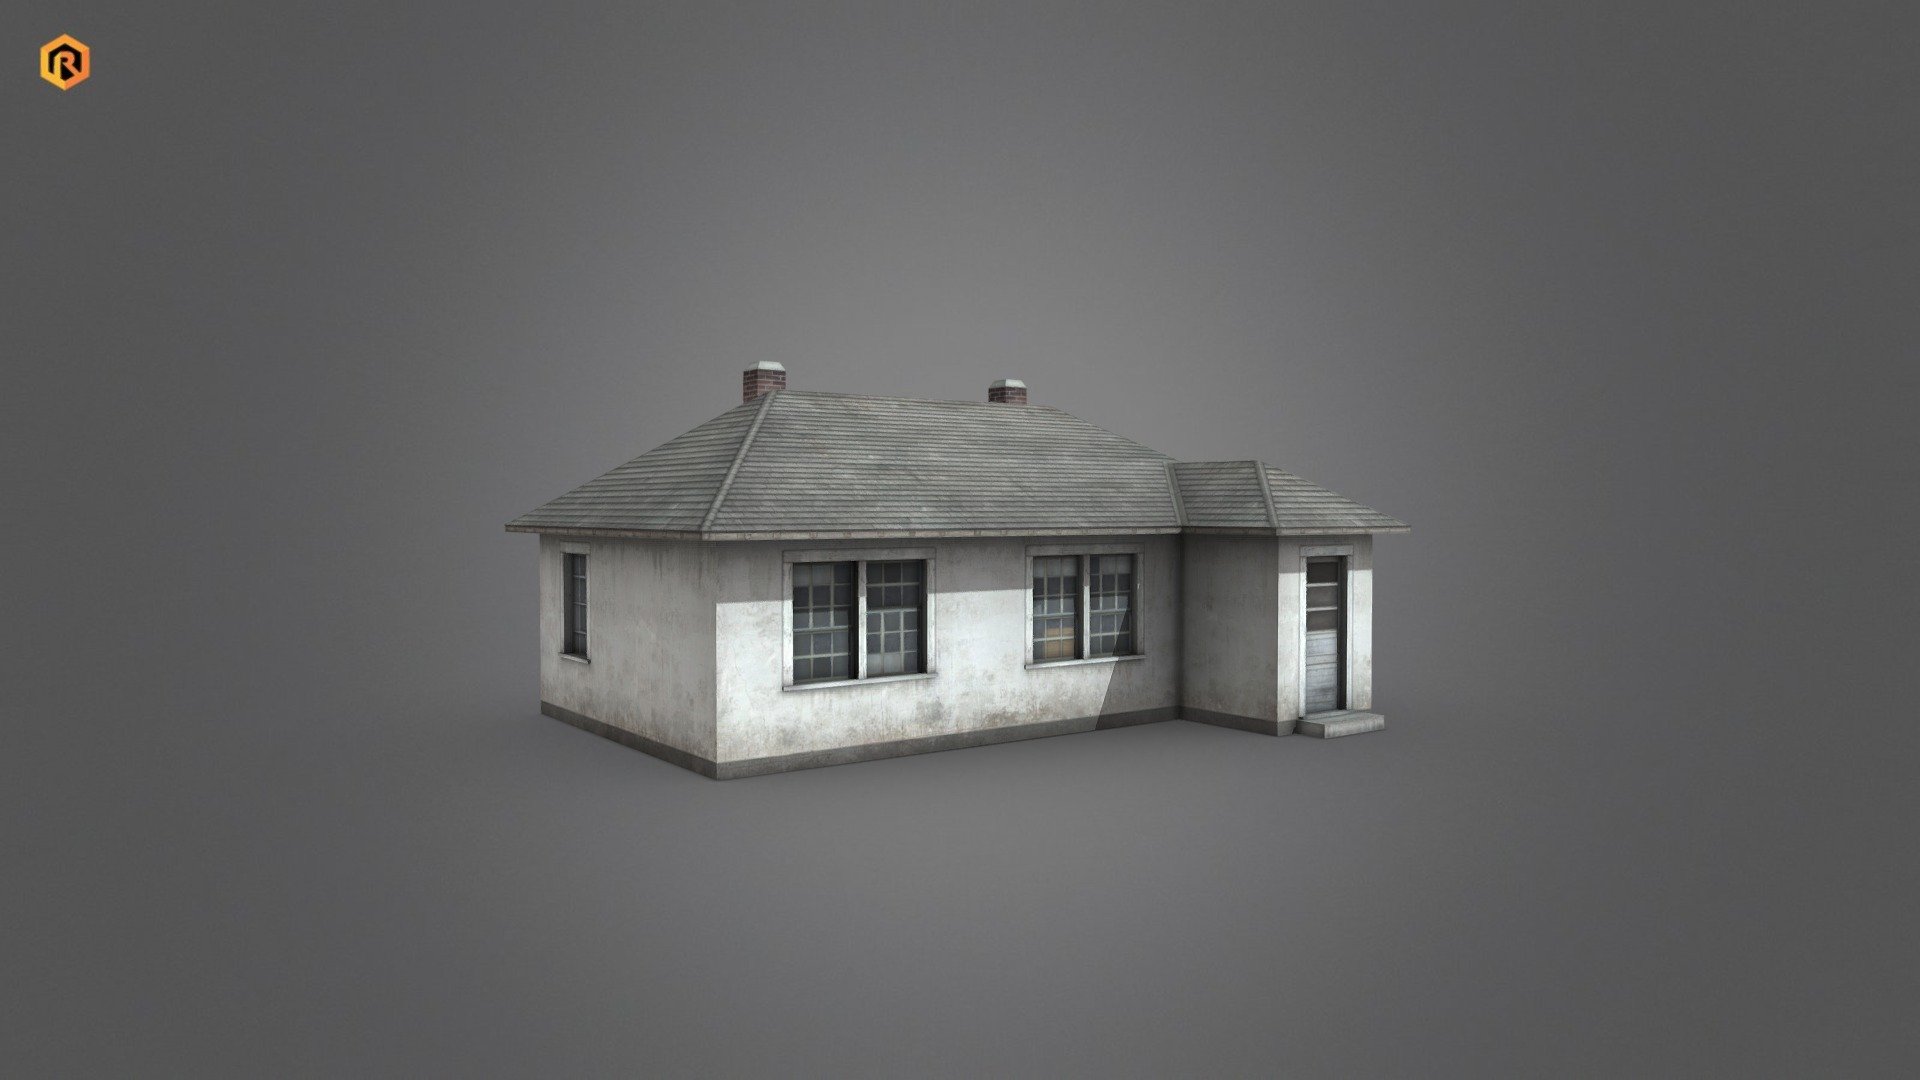 Low-poly 3D model of Residential House.

It is best for use in games and other VR / AR, real-time applications such as Unity or Unreal Engine. 

It can also be rendered in Blender (ex Cycles) or Vray as the model is equipped with proper textures.   

You can also buy this model in a bundle: https://skfb.ly/owqyZ

Technical details:  




2048 x 2048 Diffuse and AO textures

570 Triangles

310 Polygons

366 Vertices

Model is one mesh

Model completely unwrapped   

All nodes, materials and textures are appropriately named   

Lot of additional file formats included (Blender, Unity, Maya etc.)   

More file formats are available in additional zip file on product page.

Please feel free to contact me if you have any questions or need any support for this asset.

Support e-mail: support@rescue3d.com - Residential House - Buy Royalty Free 3D model by Rescue3D Assets (@rescue3d) 3d model